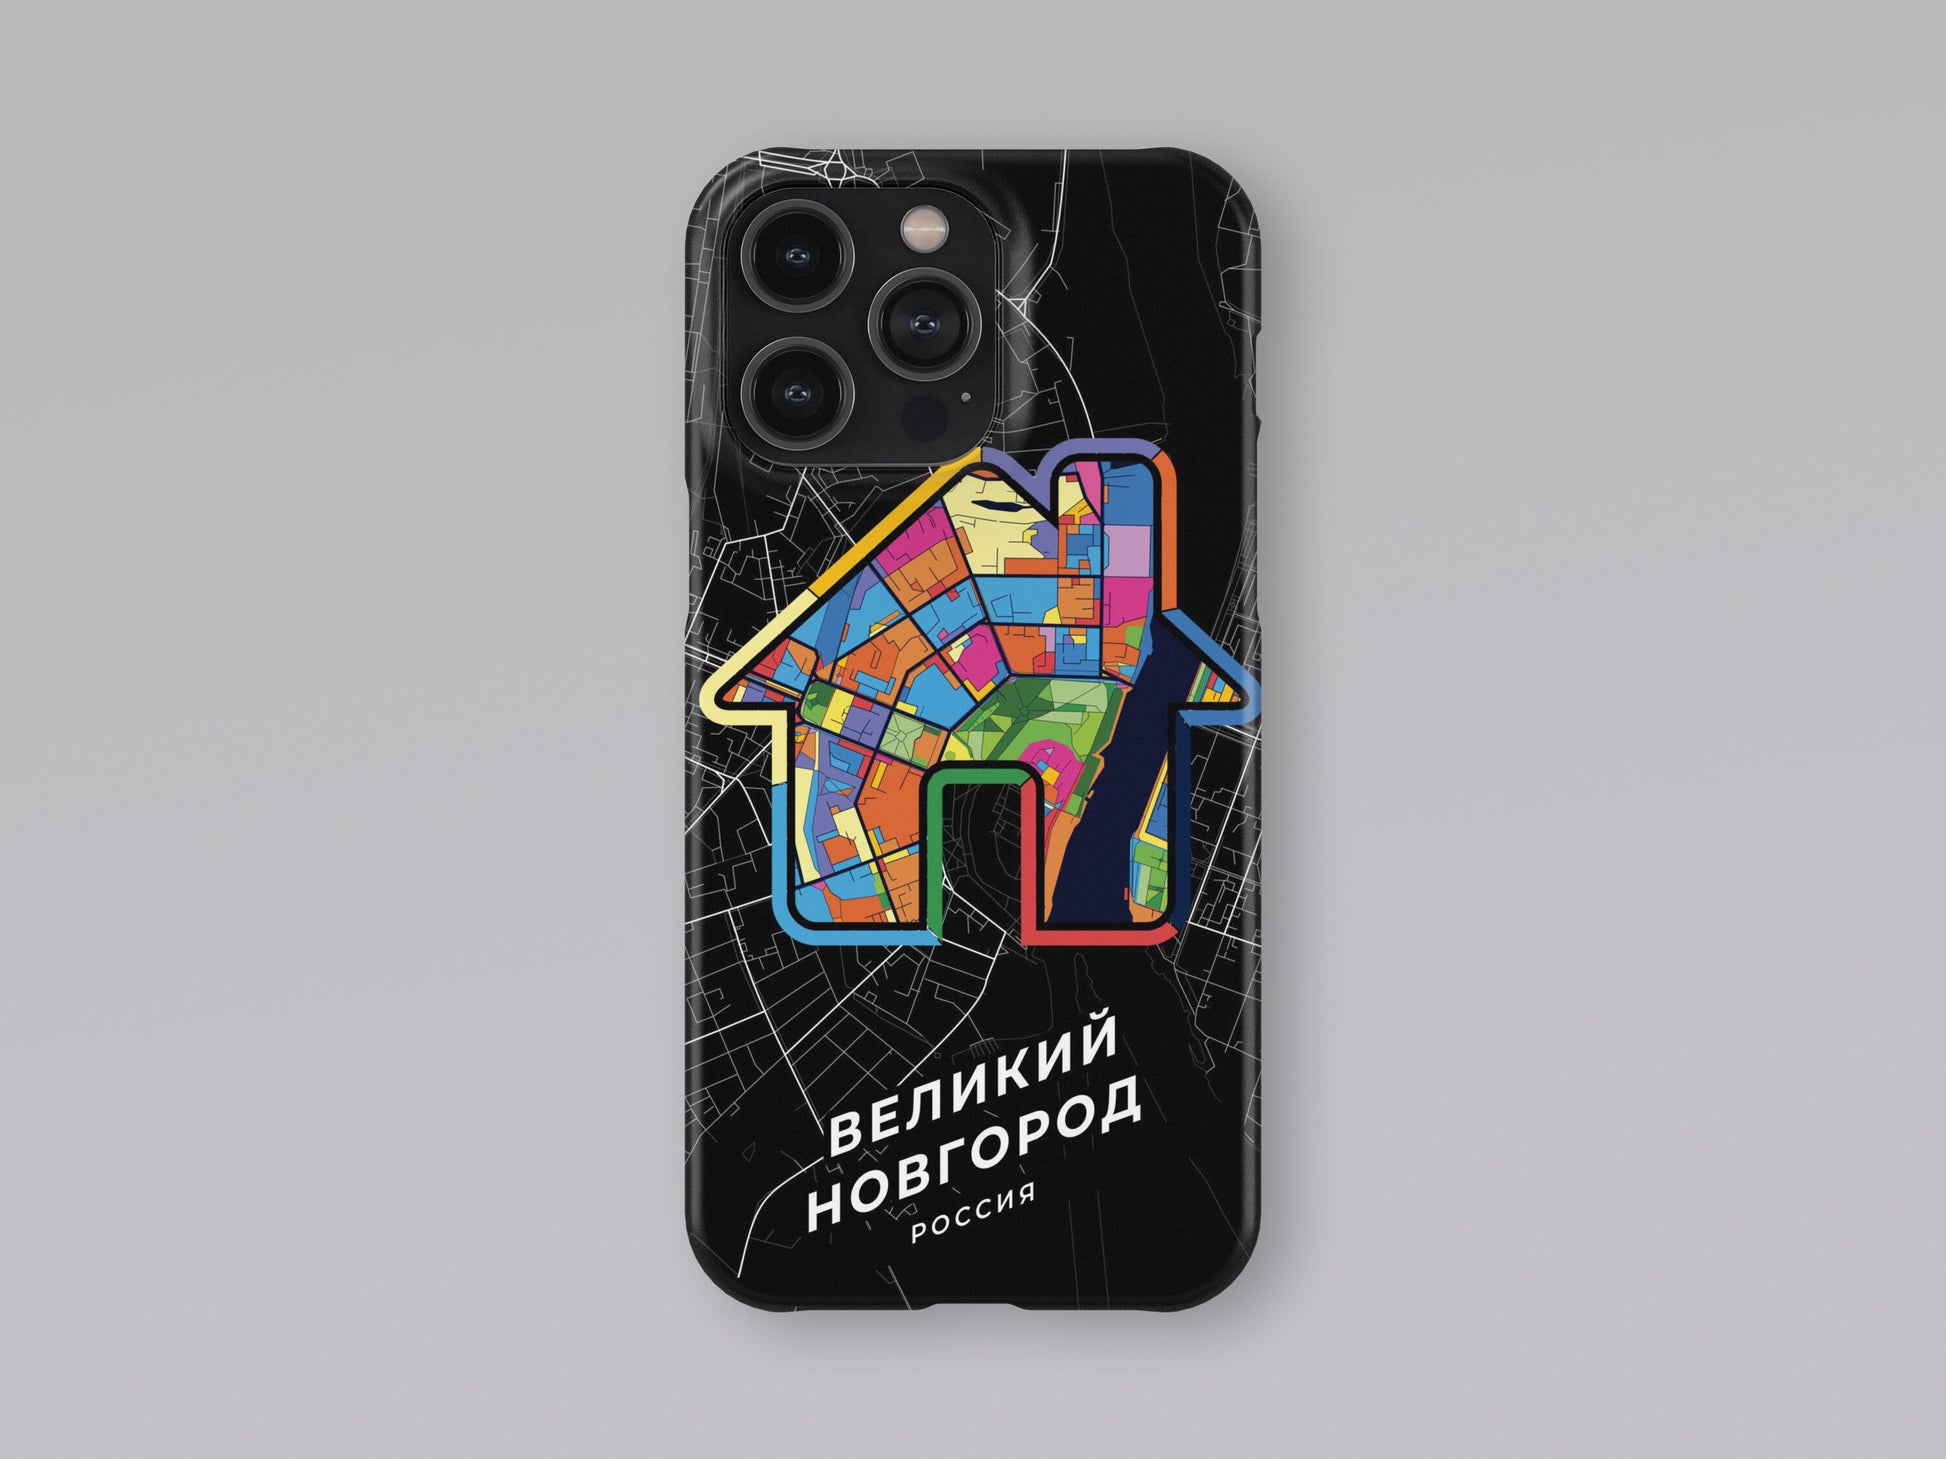 Veliky Novgorod Russia slim phone case with colorful icon 3